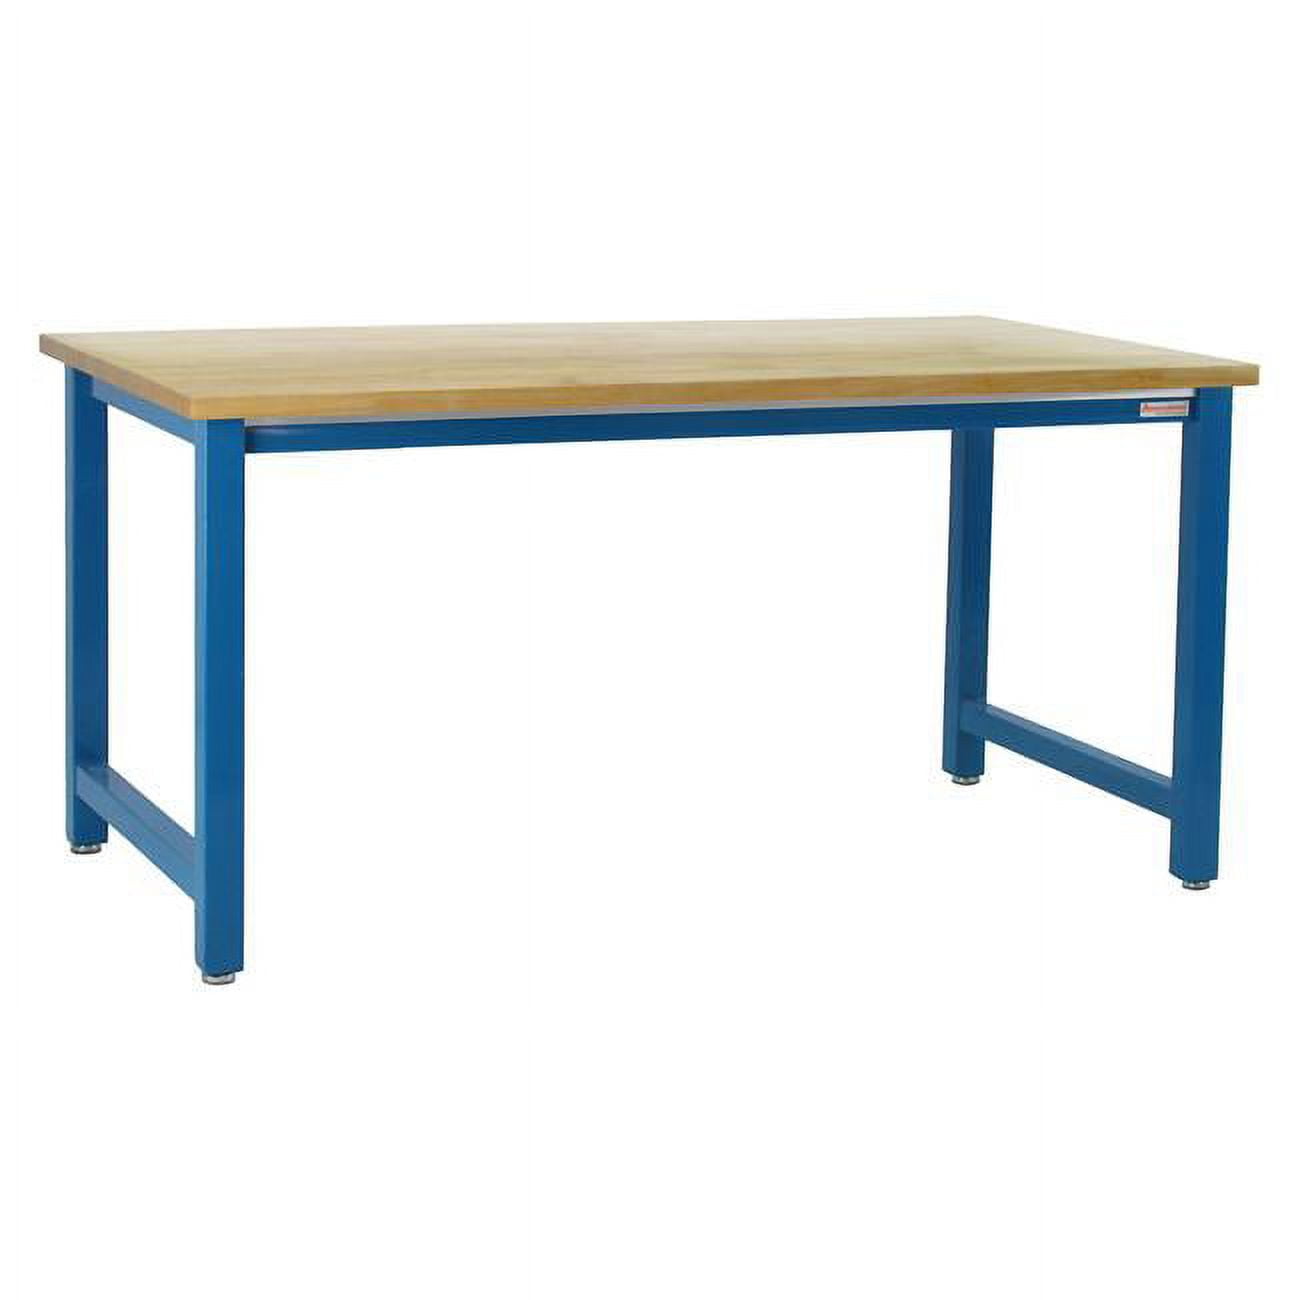 48 x 72 in. Kennedy Workbenches with Solid 1.75 in. Thick Lacquered Finish Maple Butcher Block Top, Light Blue -  KD Gabinetes, KD2191921